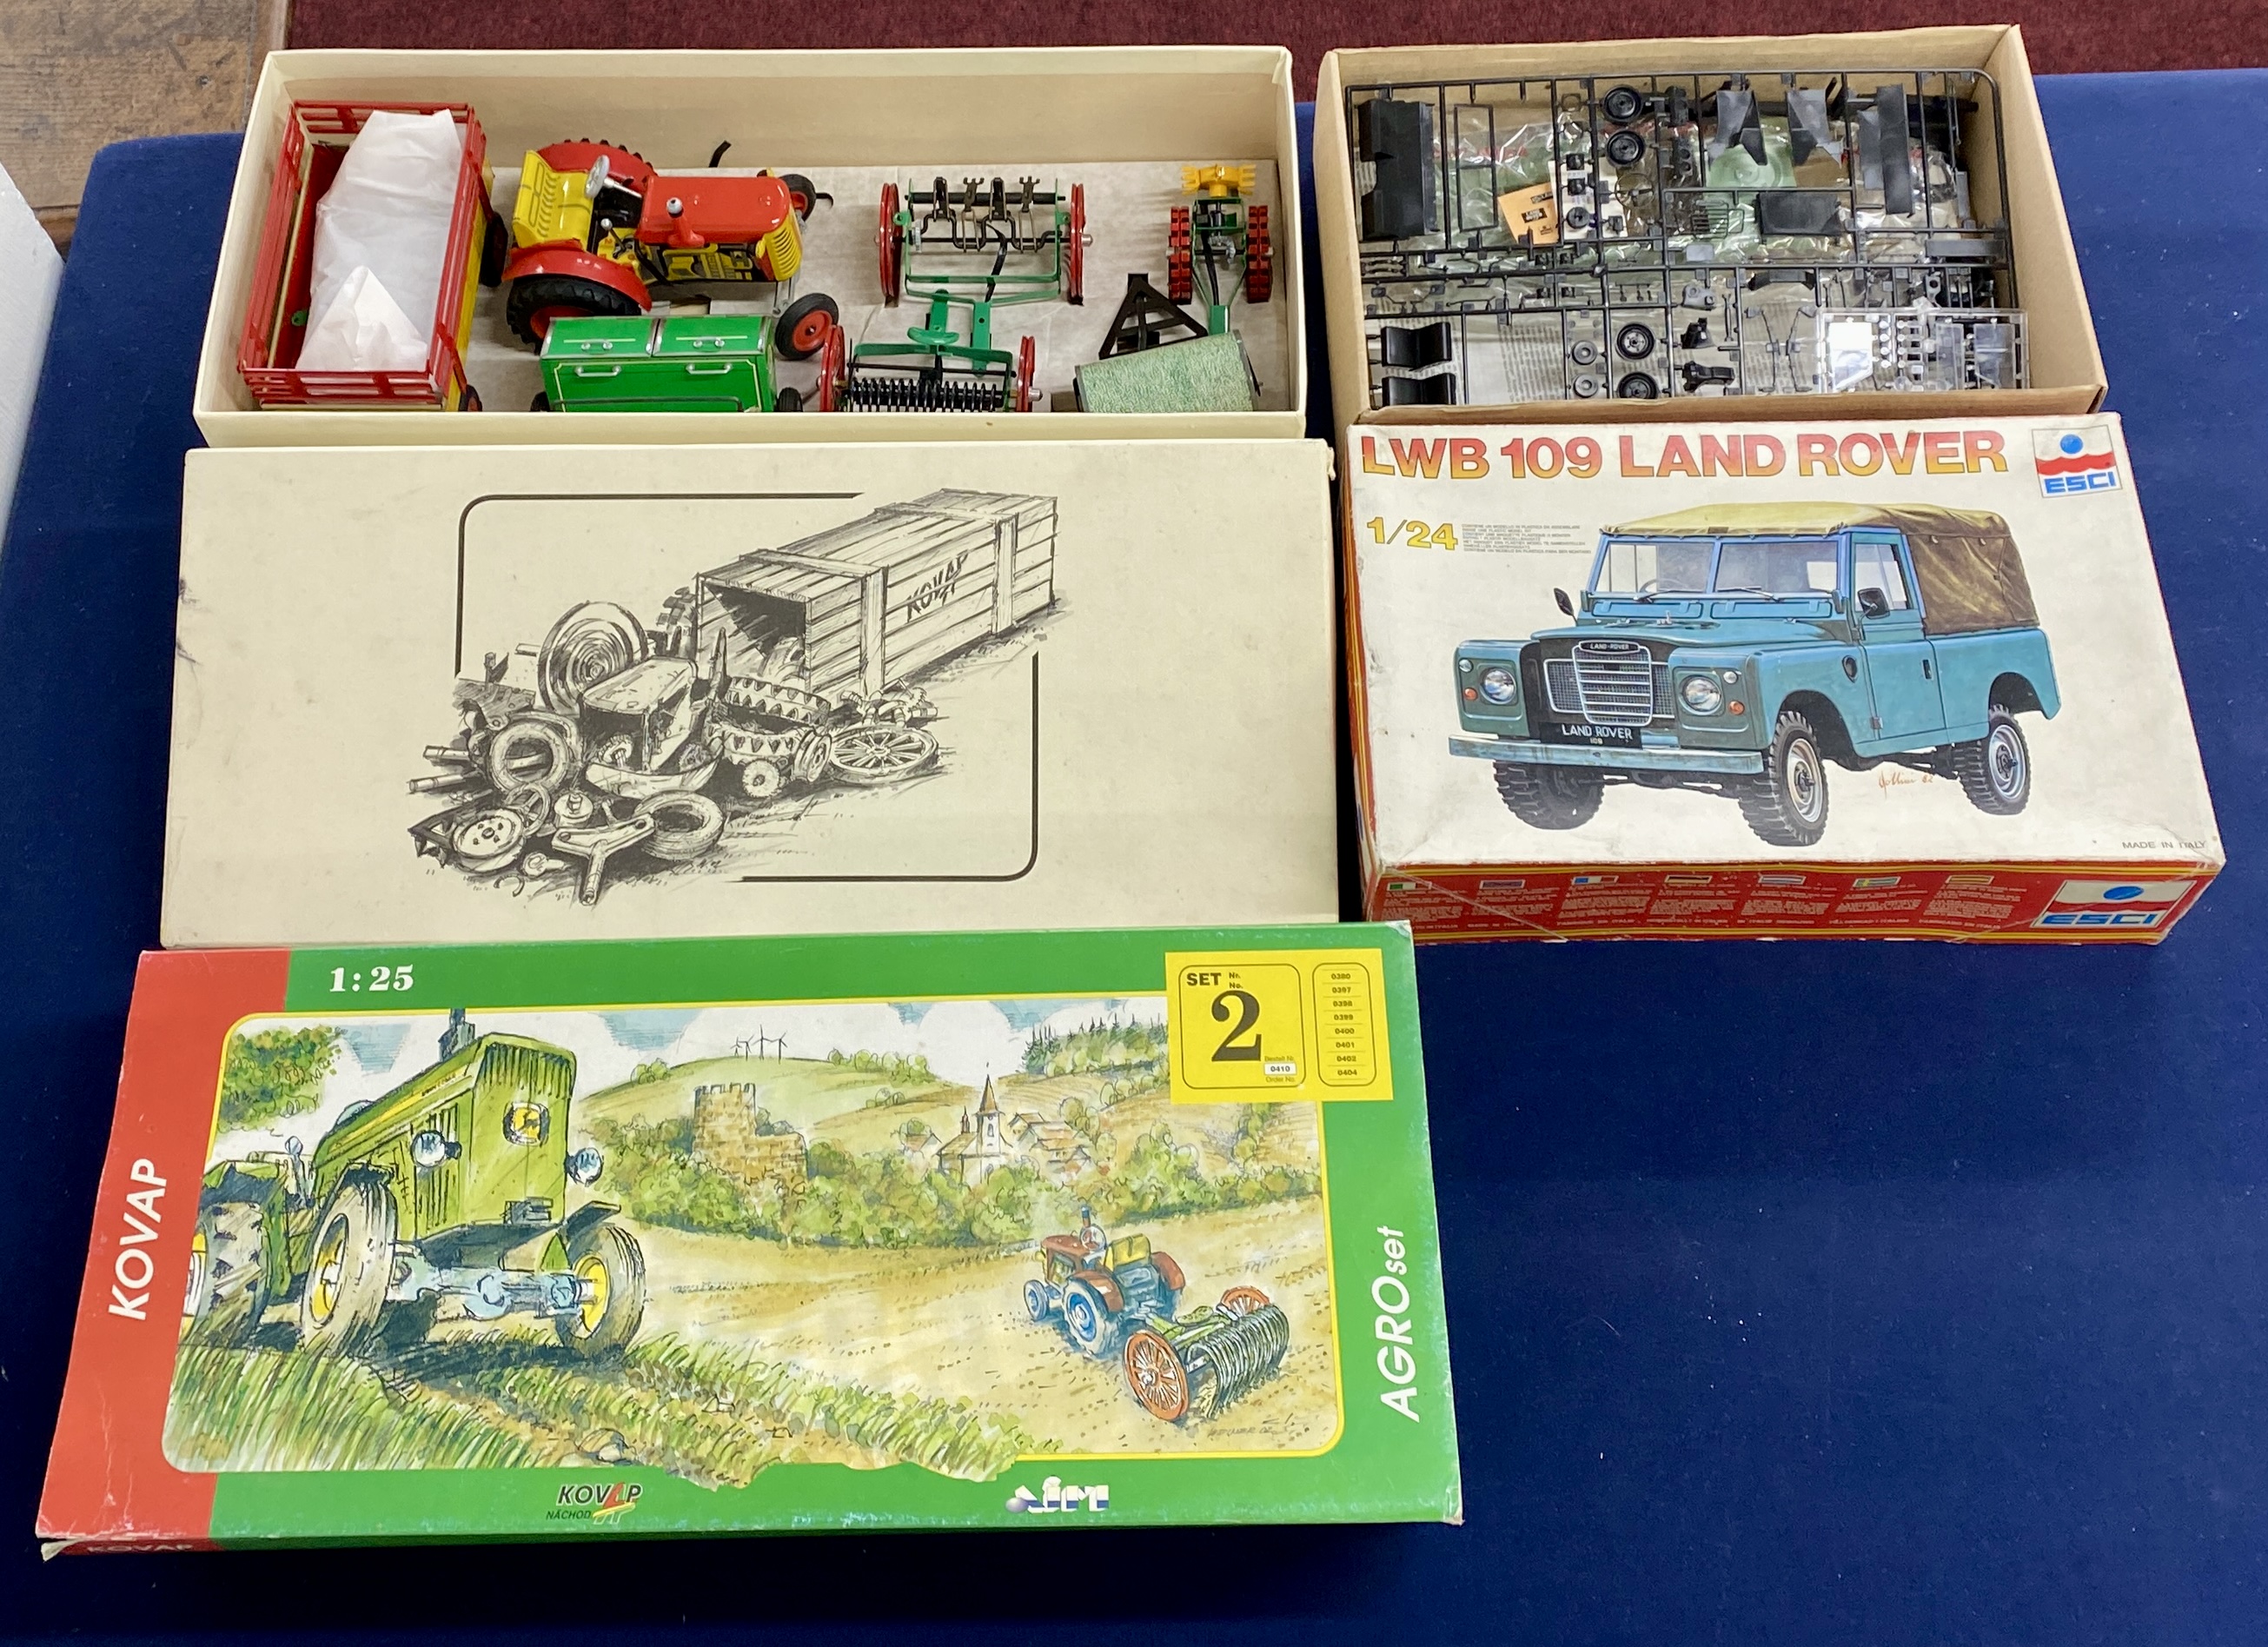 A KOVAO 1:25 scale AGRO set and a LWB 109 Land Rover 1/24 scale ESCI 3034